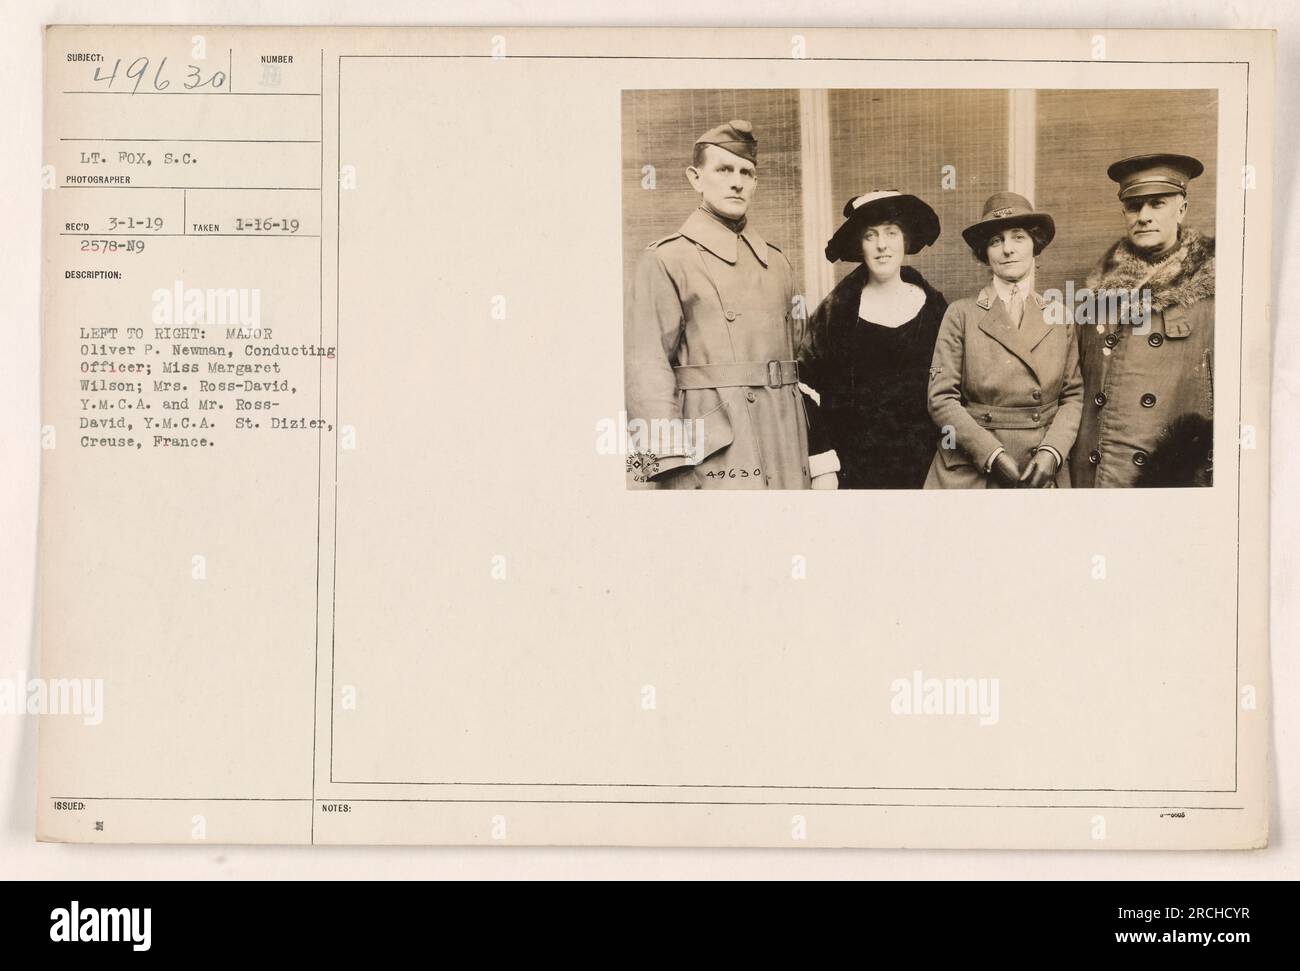 Left to right: Major Oliver P. Newman, Conducting Officer; Miss Margaret Wilson; Mrs. Ross-David, Y.M.C.A.; Mr. Ross-David, Y.M.C.A. St. Dizier, Creuse, France. This photograph, taken on January 16, 1919, shows the individuals mentioned in the description. Lieutenant Fox of the Signal Corps is also referenced in the details, although he is not pictured in this image. Stock Photo